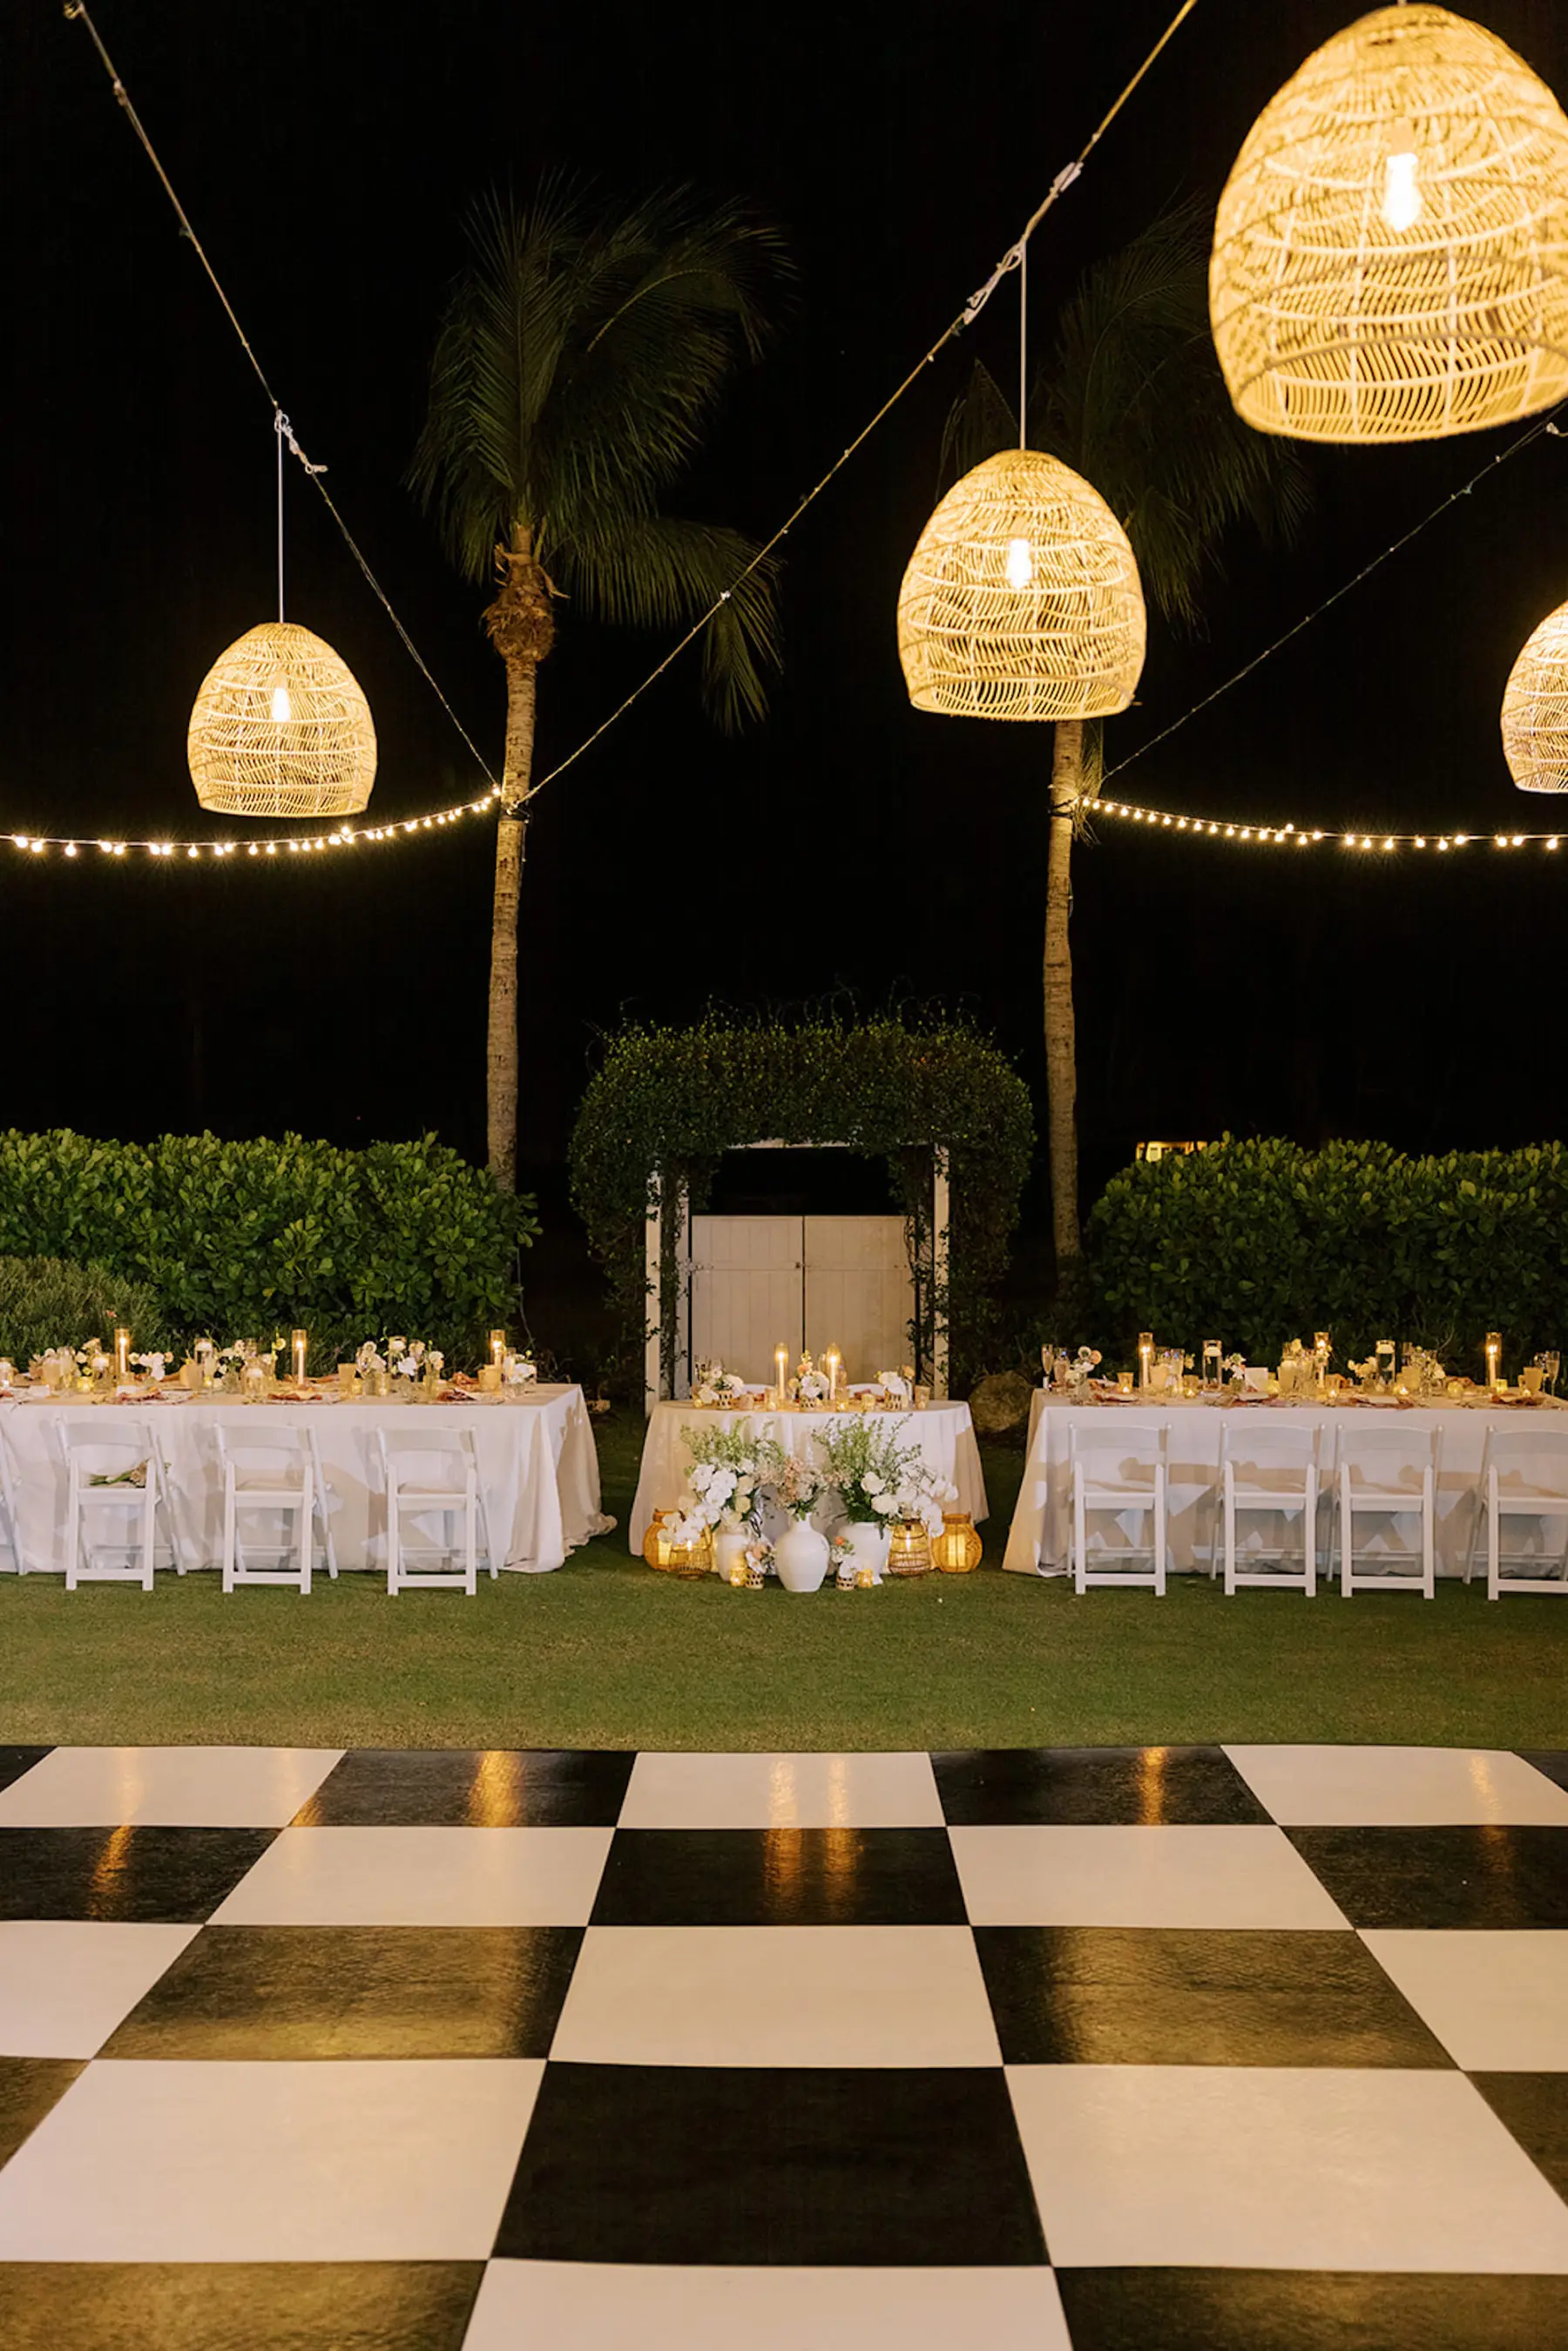 Black and White Checkered Dance Floor | White and Pink Coastal Wedding Reception Inspiration | Sarasota Event Venue The Resort at Longboat Key Club | Planner Elegant Affairs By Design